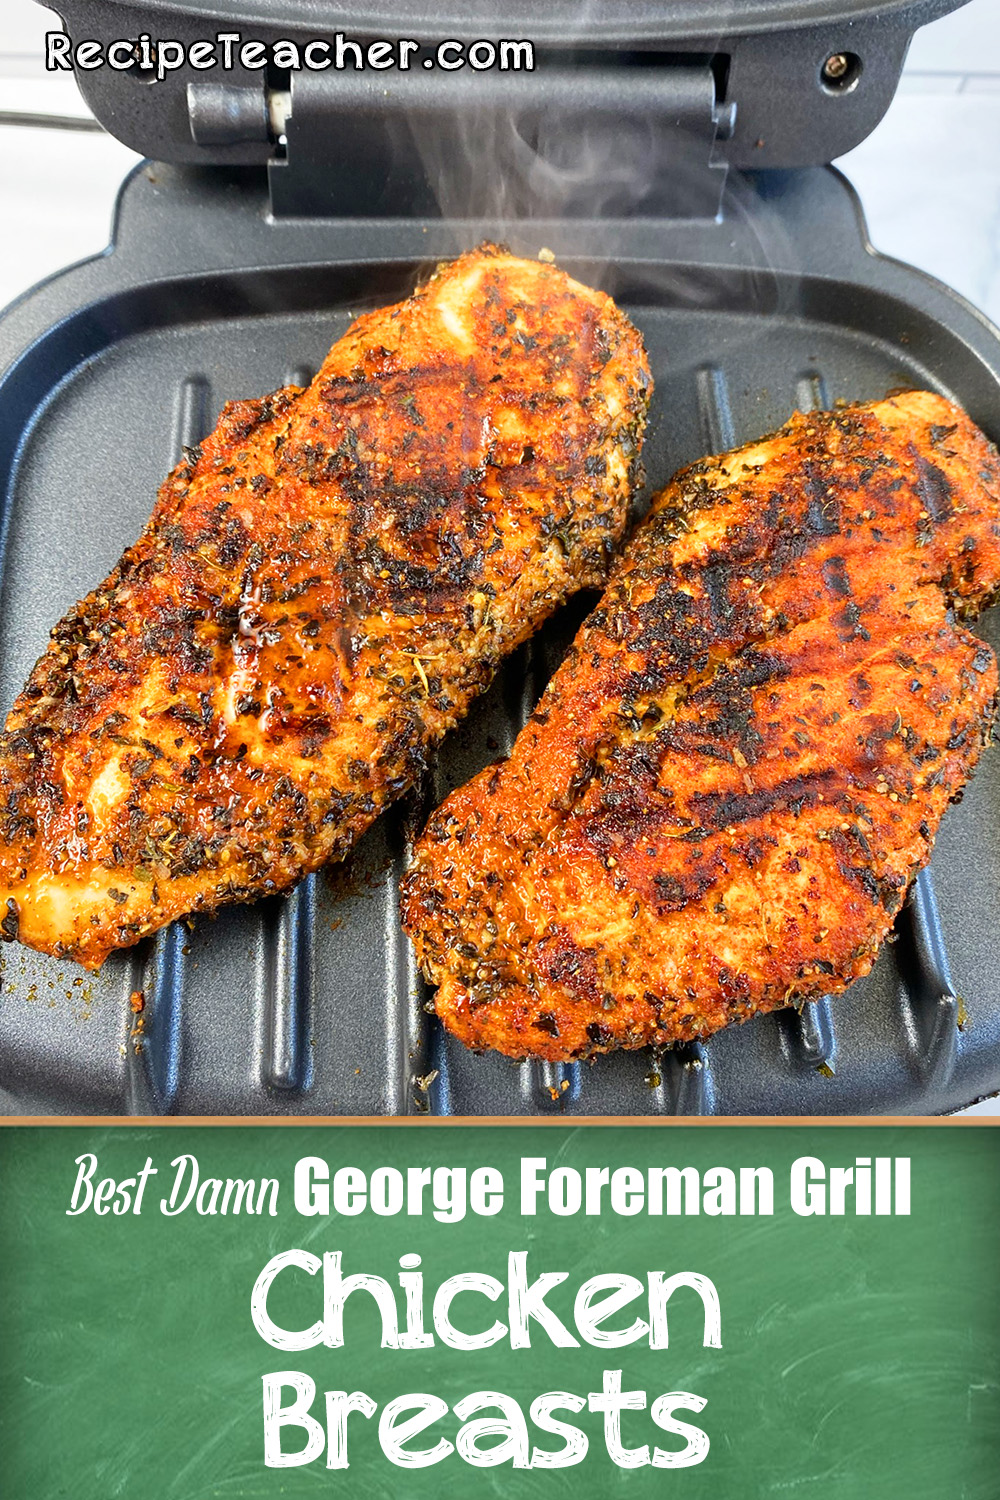 Recipe for George Foreman Grilled Chicken Breasts